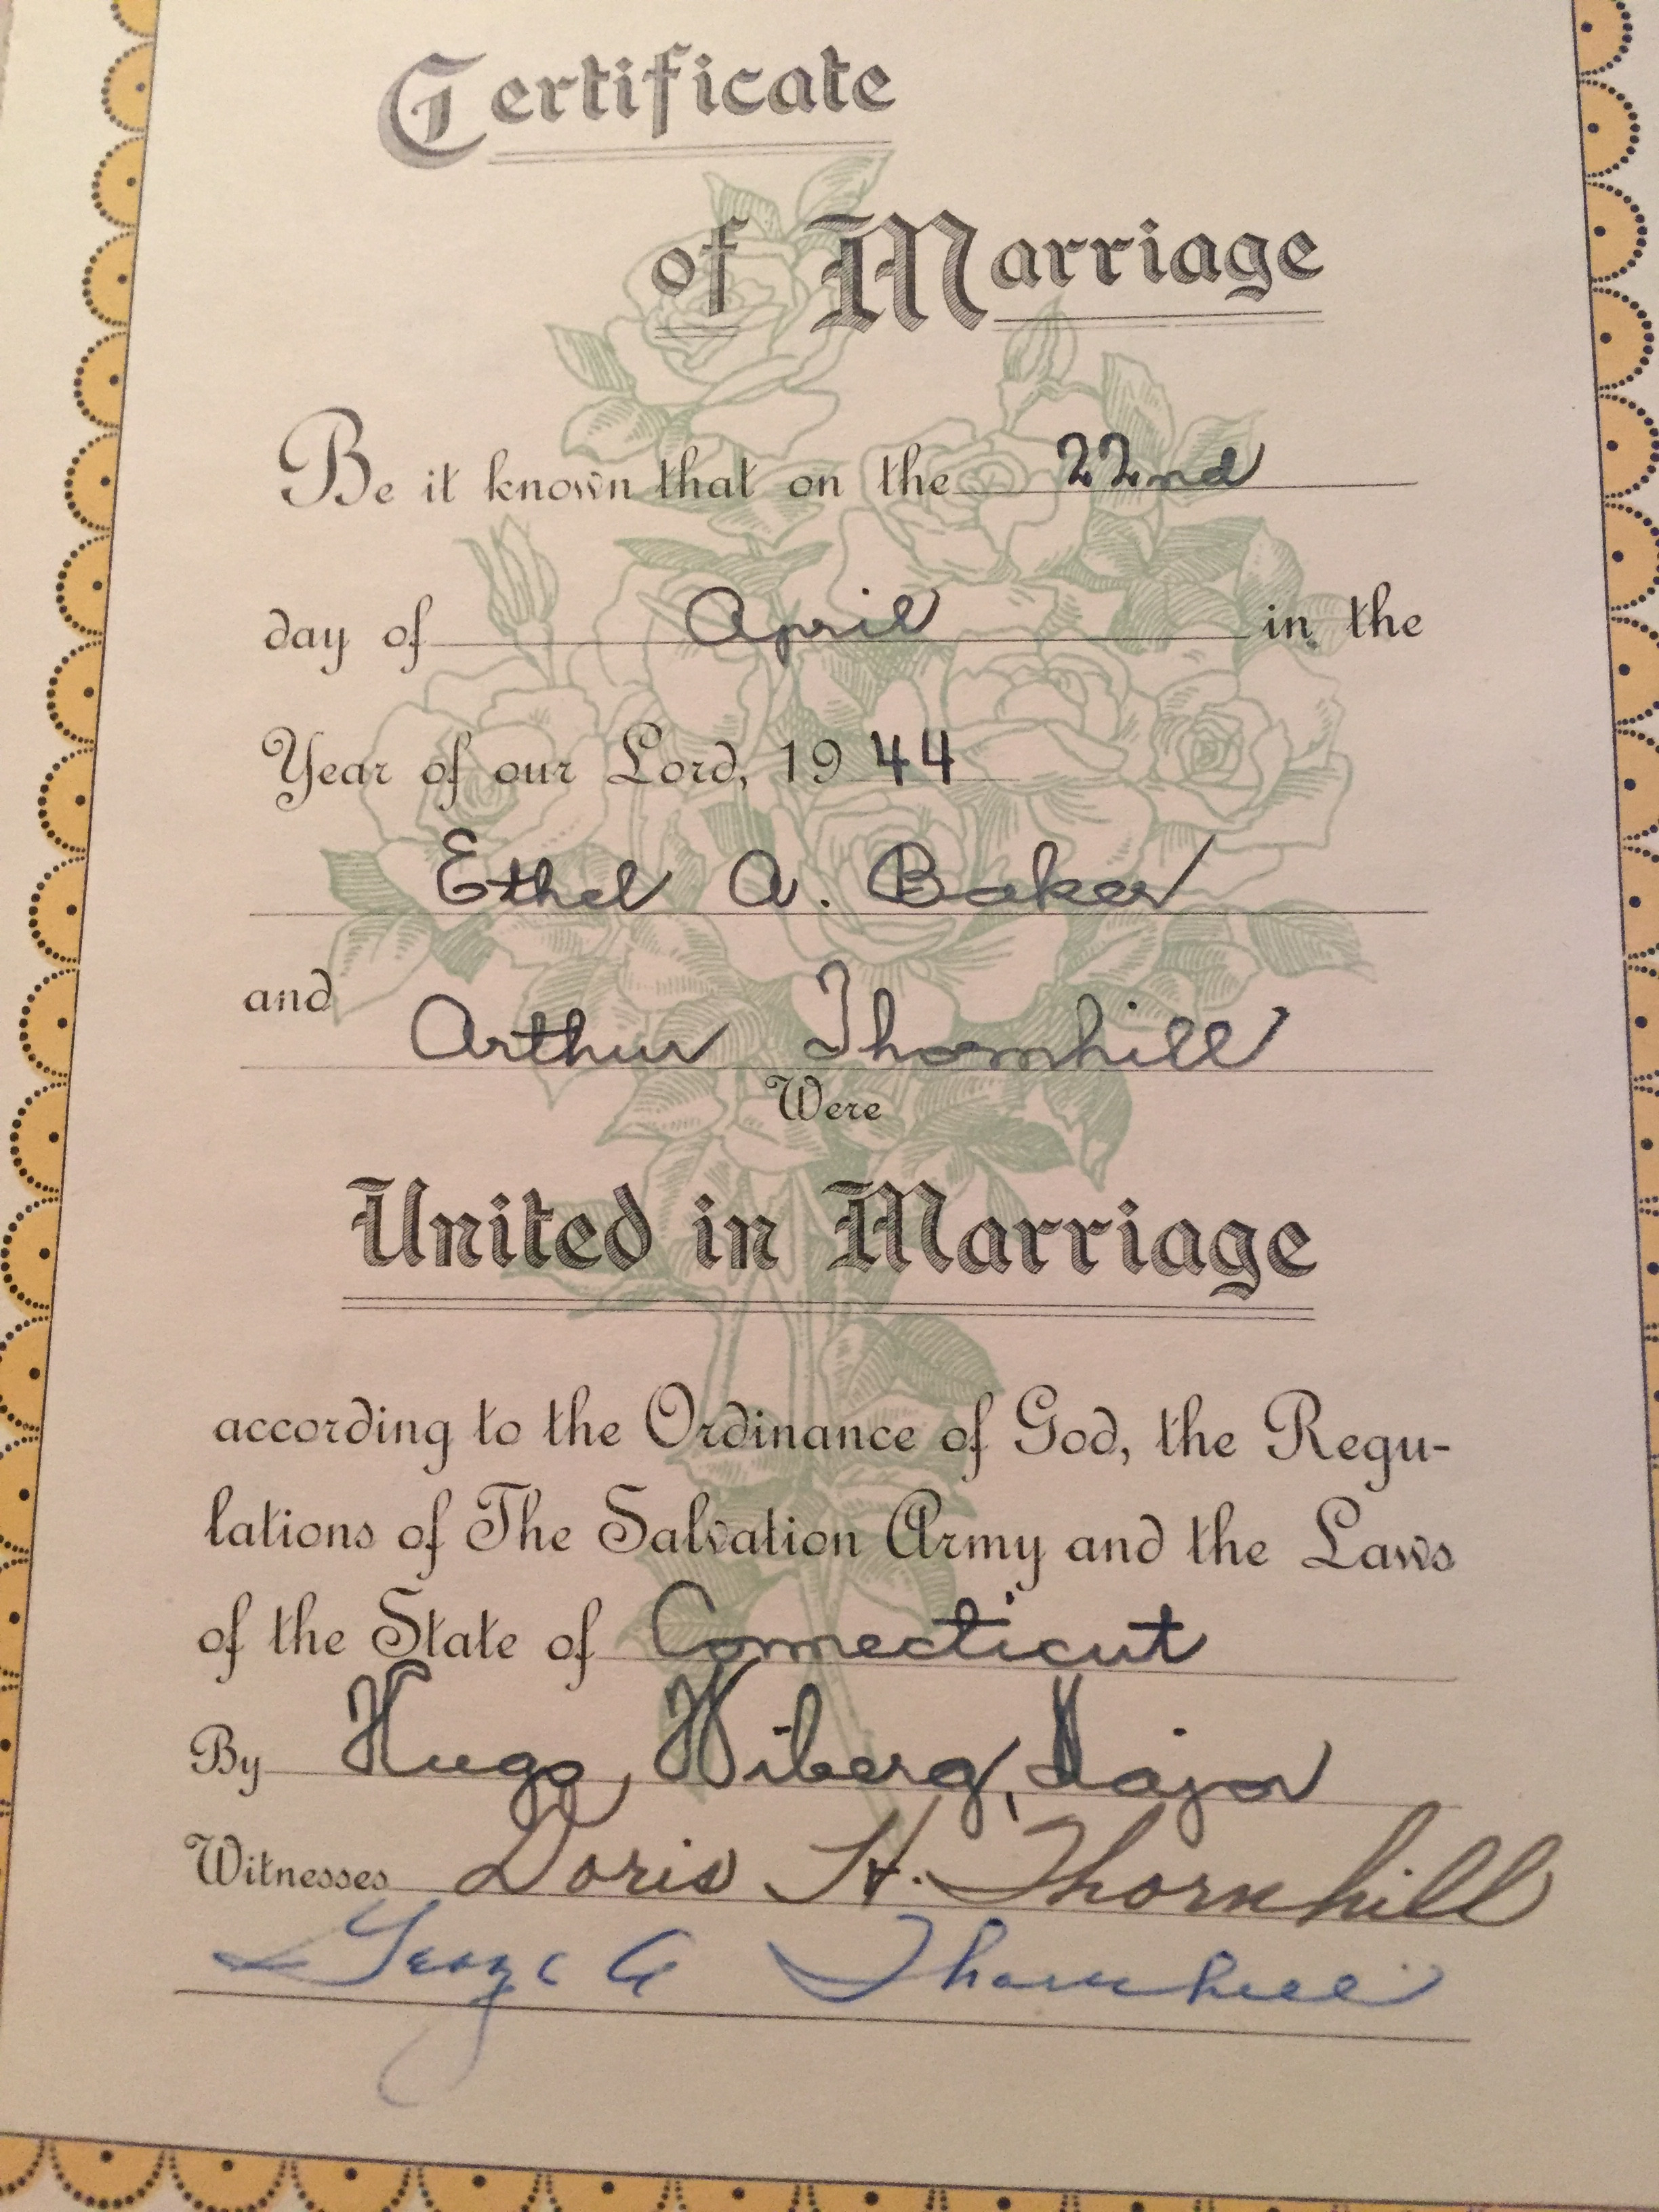 Marriage Certificate to Ethel R. Baker